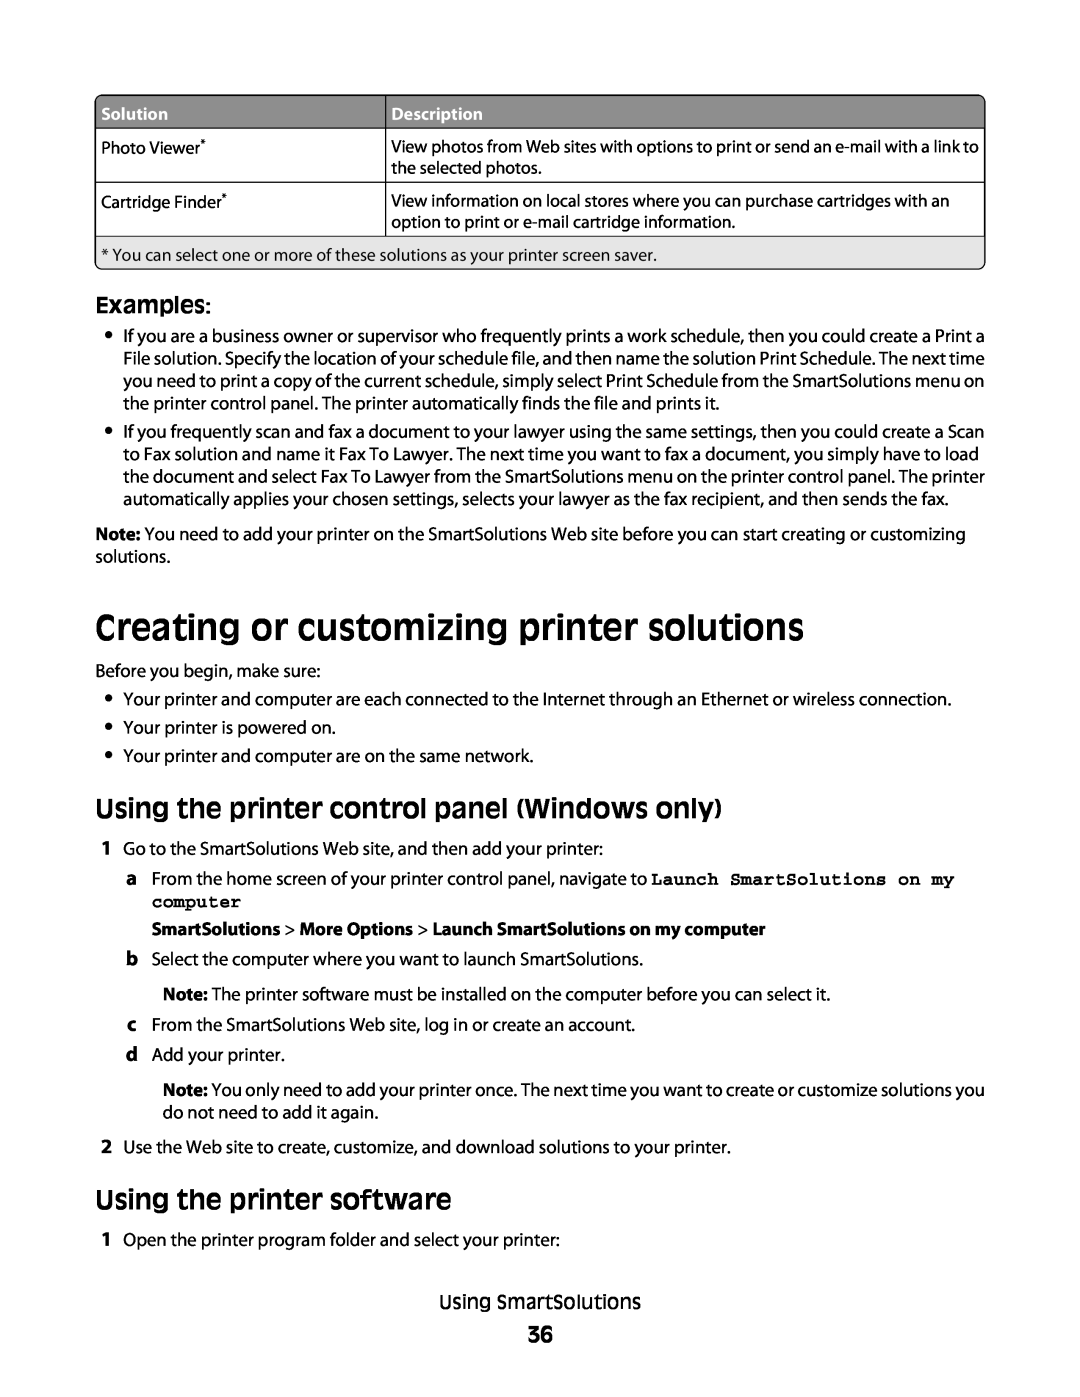 Lexmark S600 manual Creating or customizing printer solutions, Using the printer control panel Windows only, Examples 